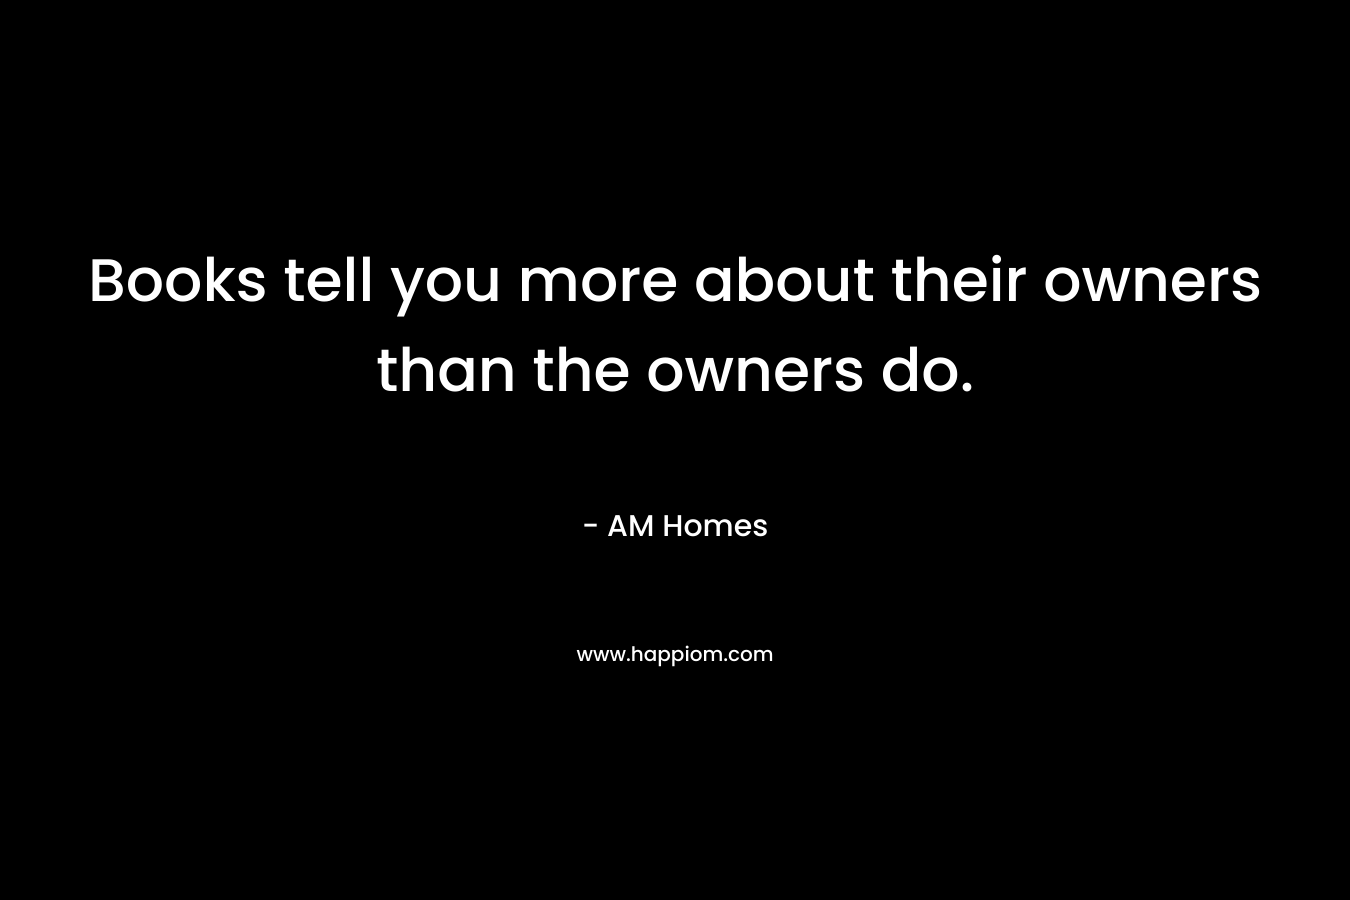 Books tell you more about their owners than the owners do. – AM Homes